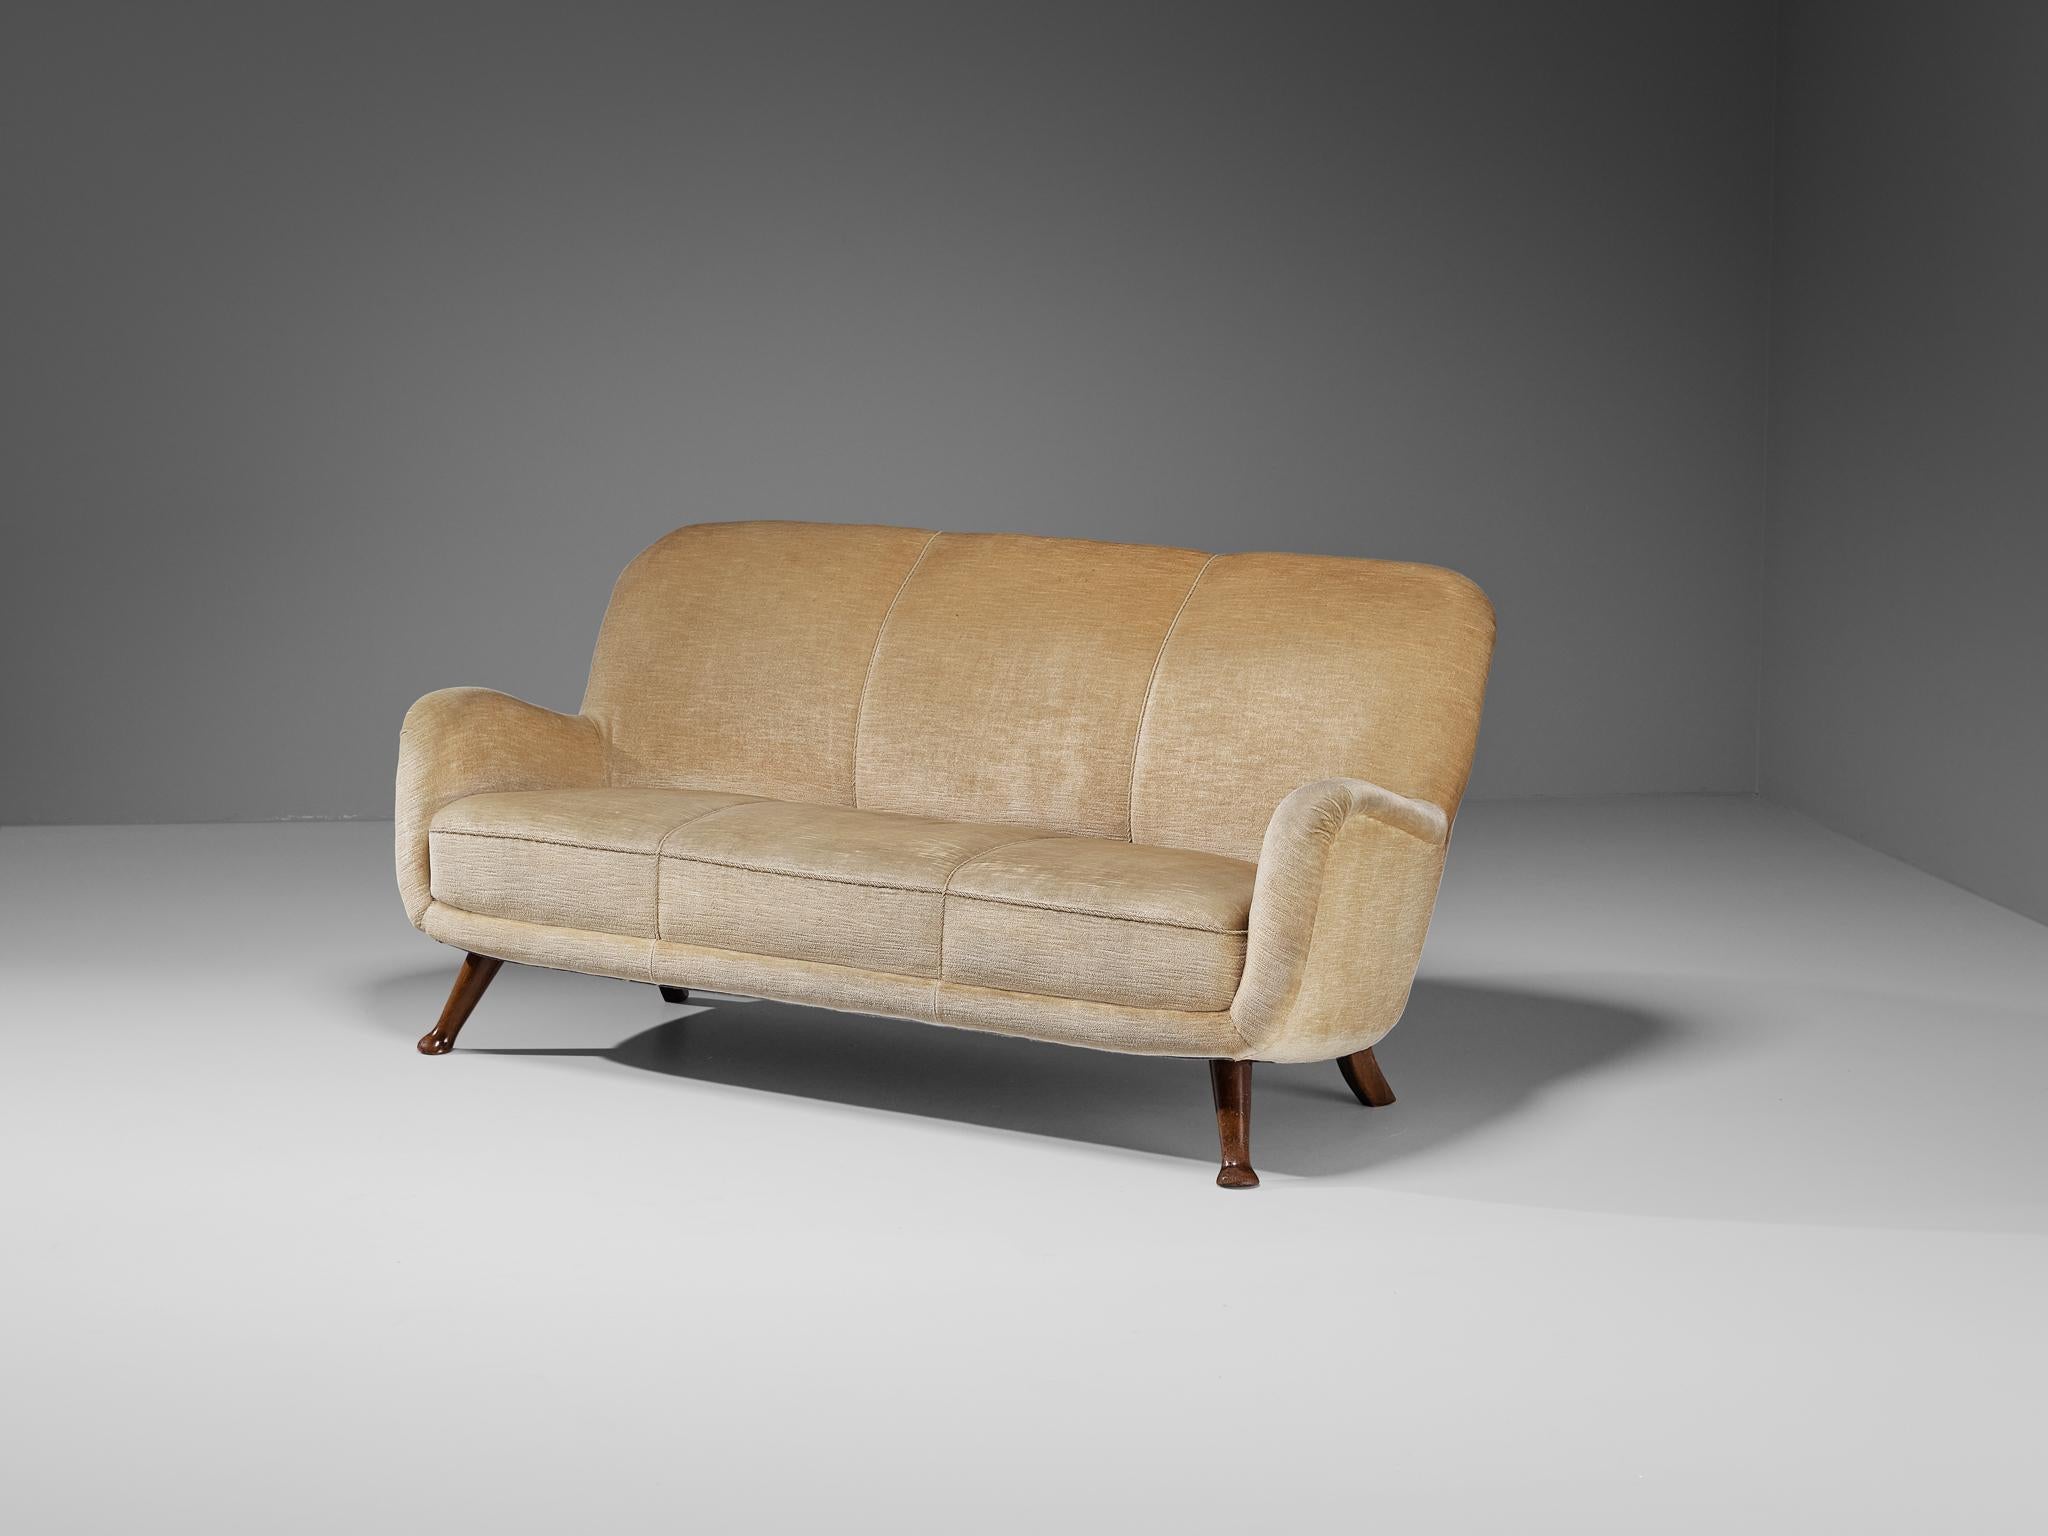 Berga Mobler, sofa, beech, wool, Denmark, 1940s.

This bold and curvy sofa is based on a solid construction with a tender touch due to the soft texture of the woolen fabric. The whole shell is slightly tilted backwards. The corpus rests on four